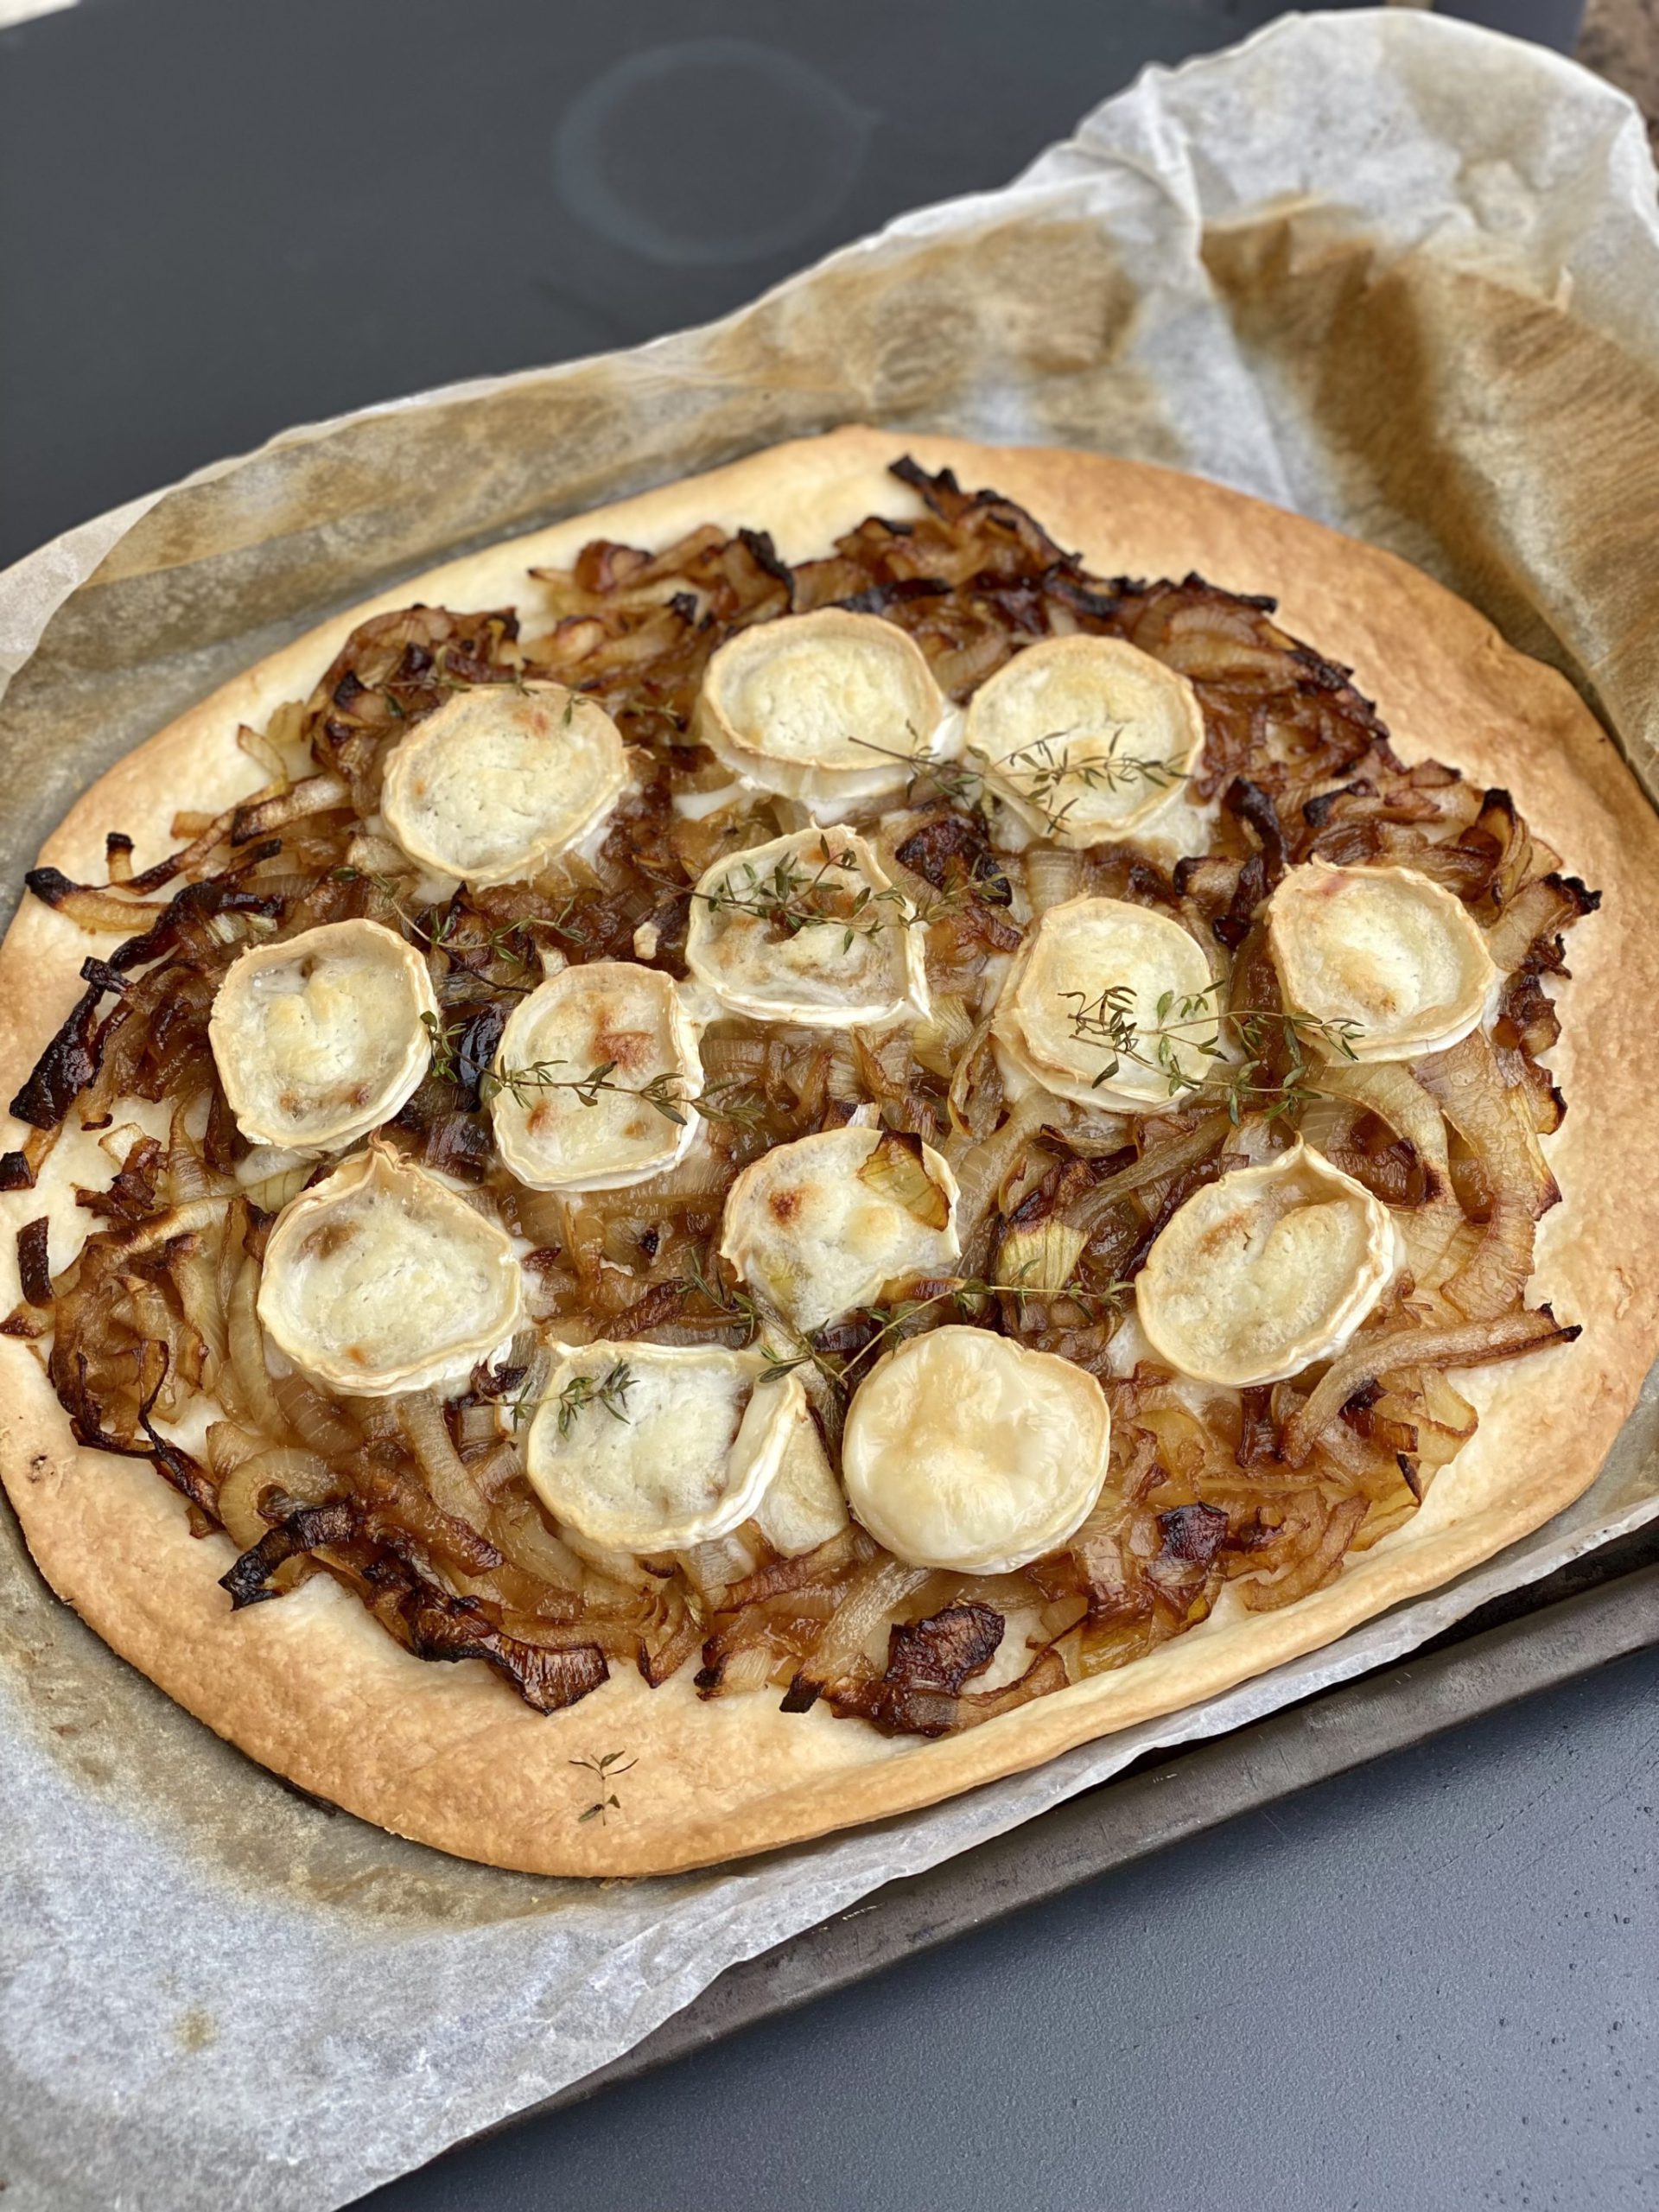 Balsamic Onion and Goat's Cheese Tart from May Simpkin